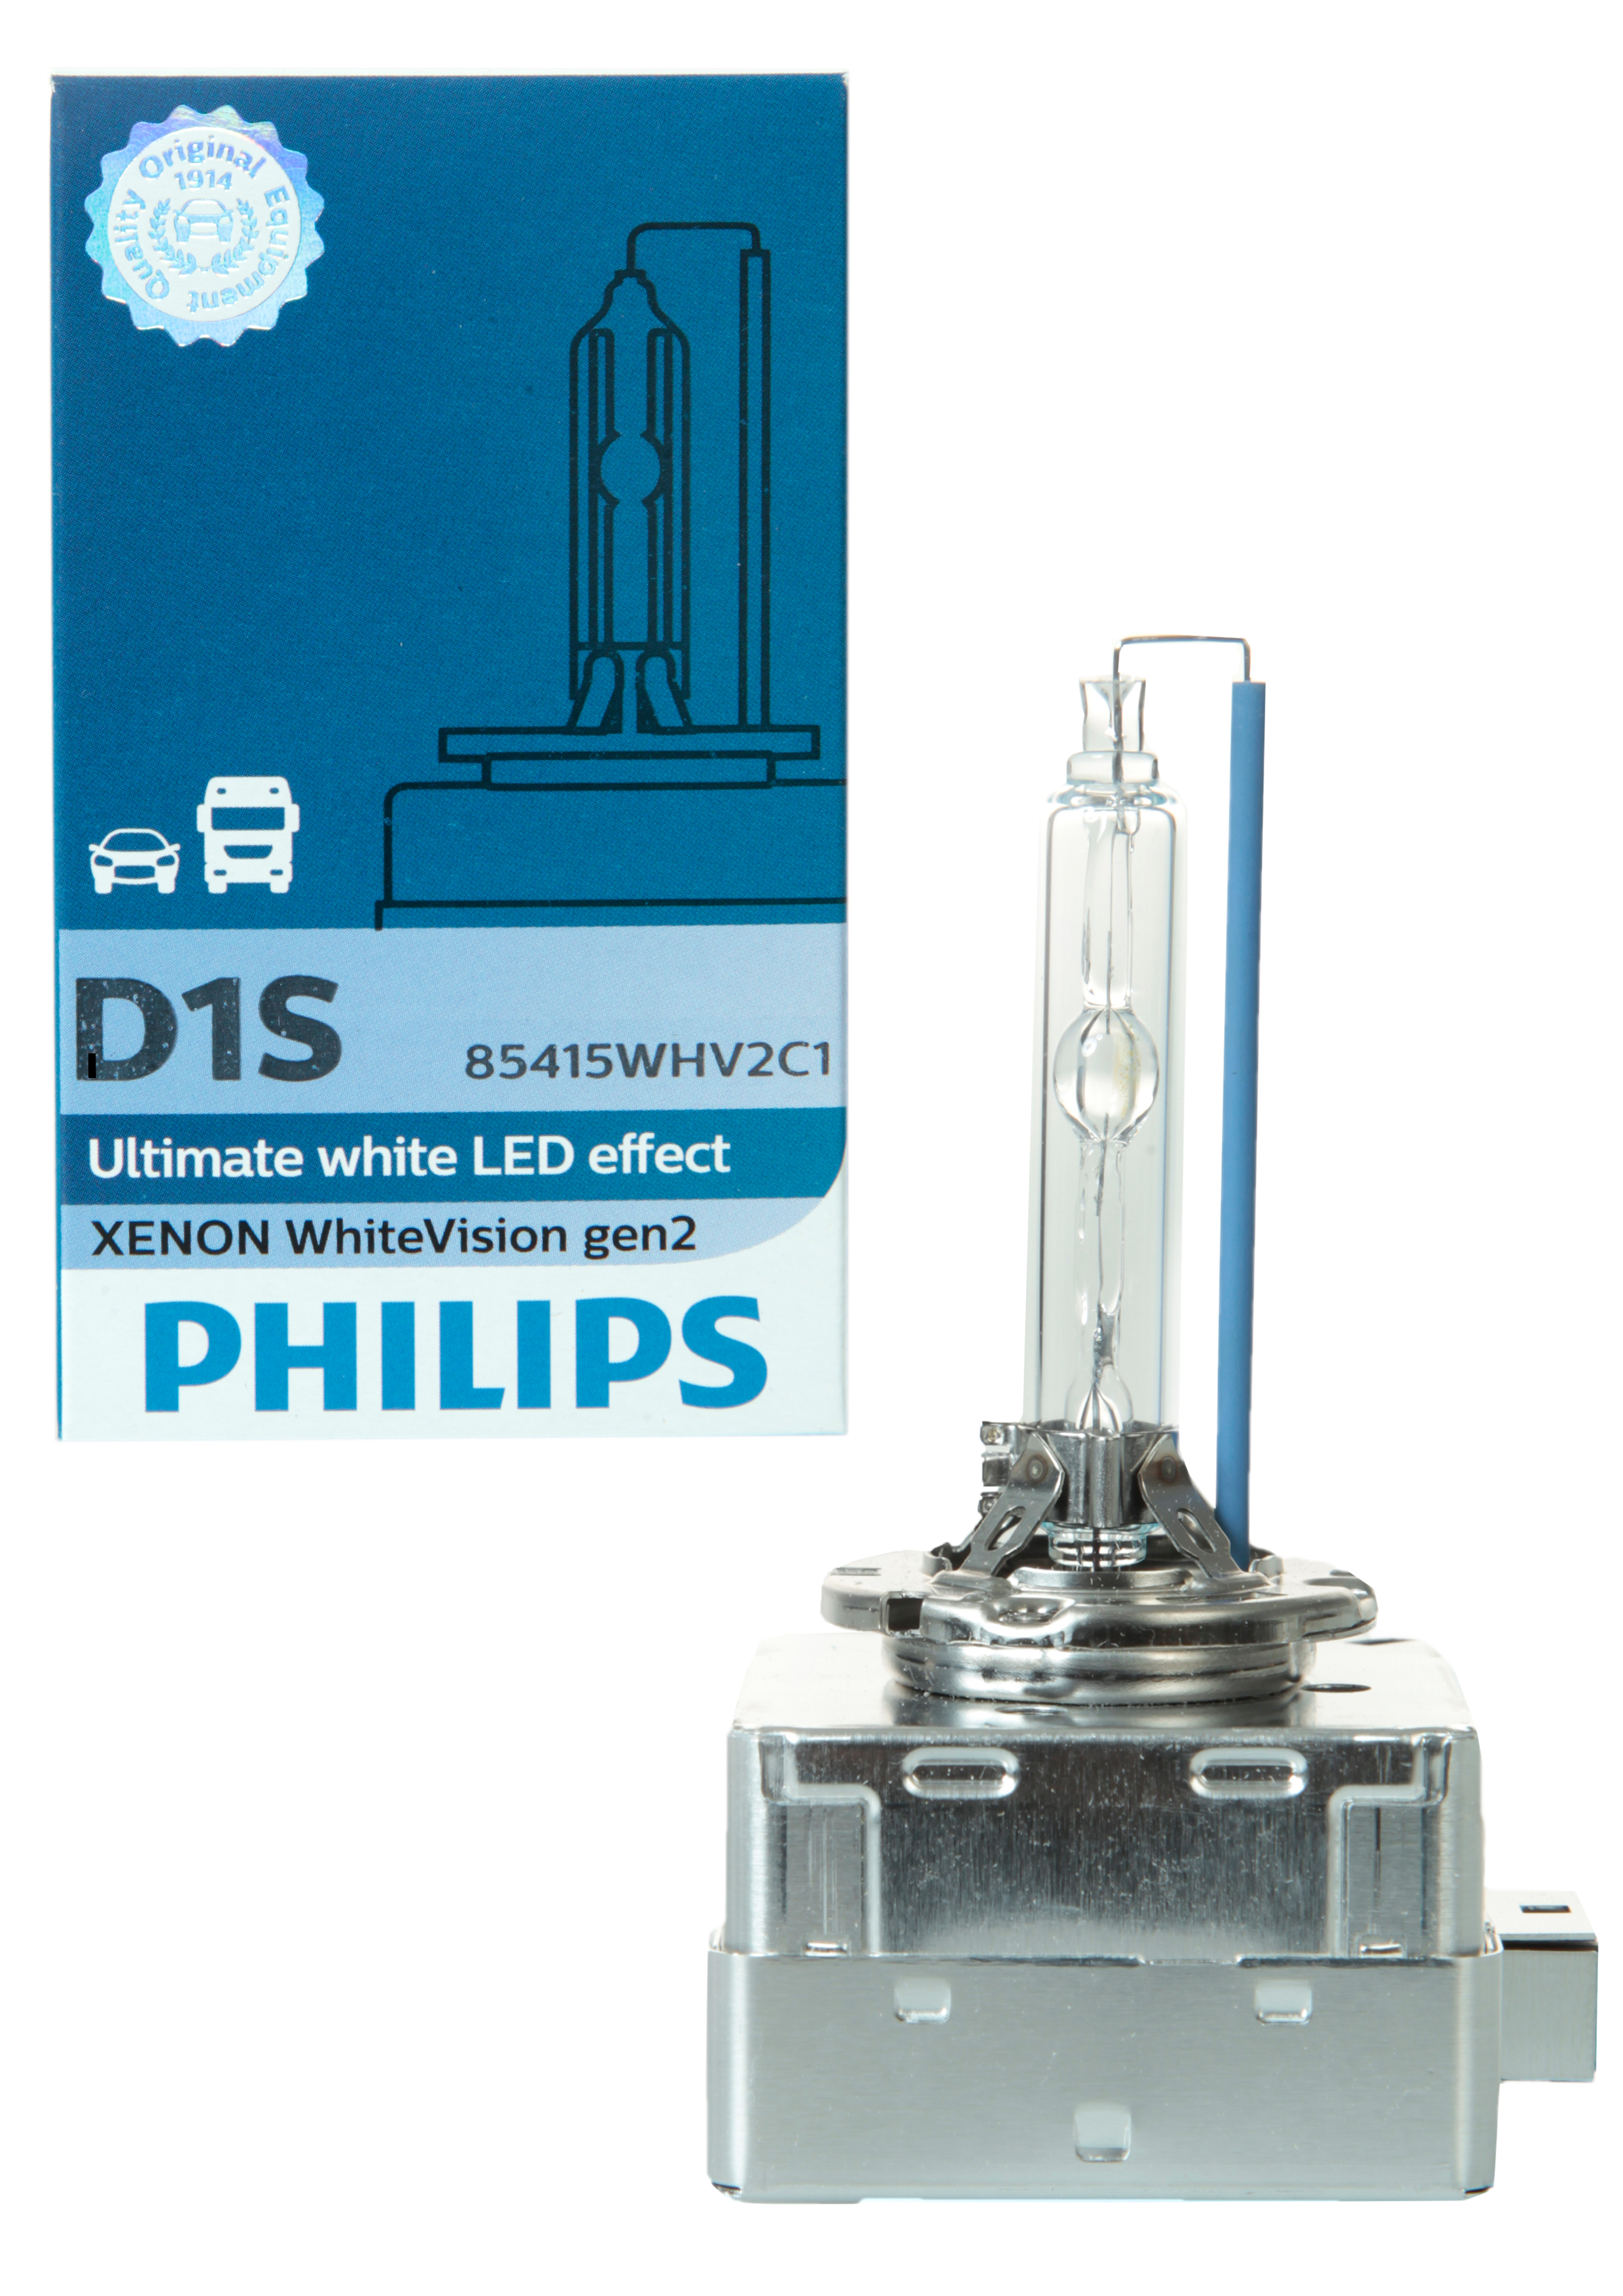 Philips D1S 85415 WHV2C1 gen2 White Vision Xenon Brenner in C1 Verpackung